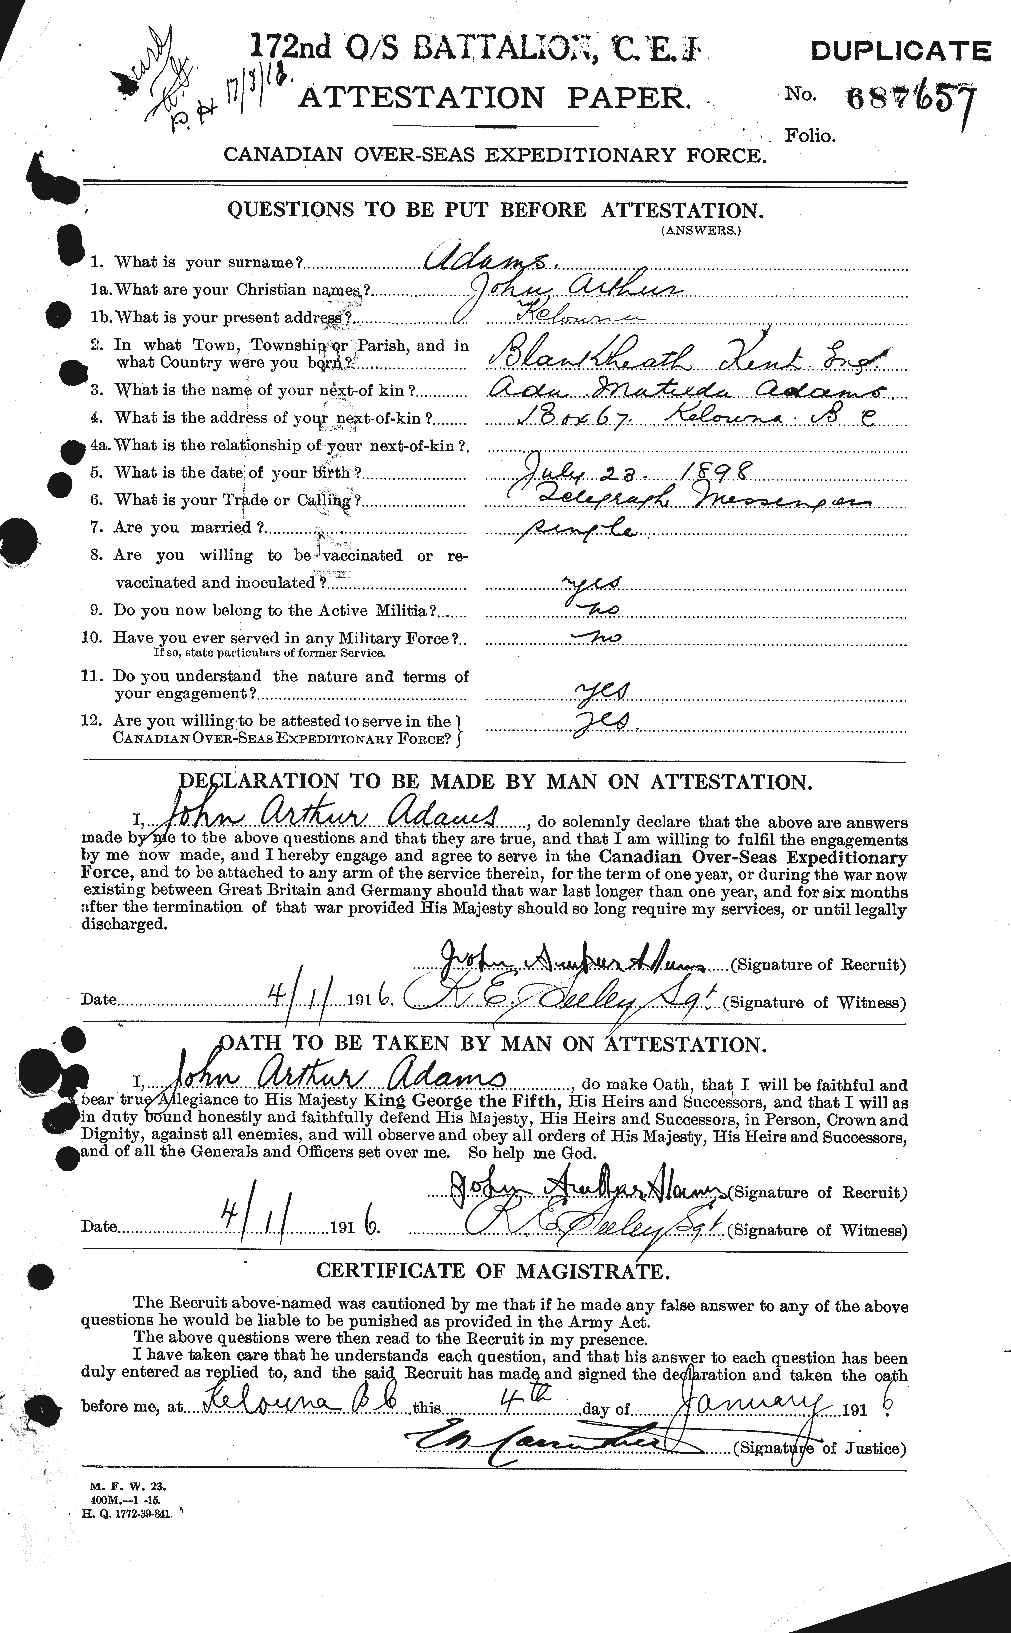 Personnel Records of the First World War - CEF 201895a